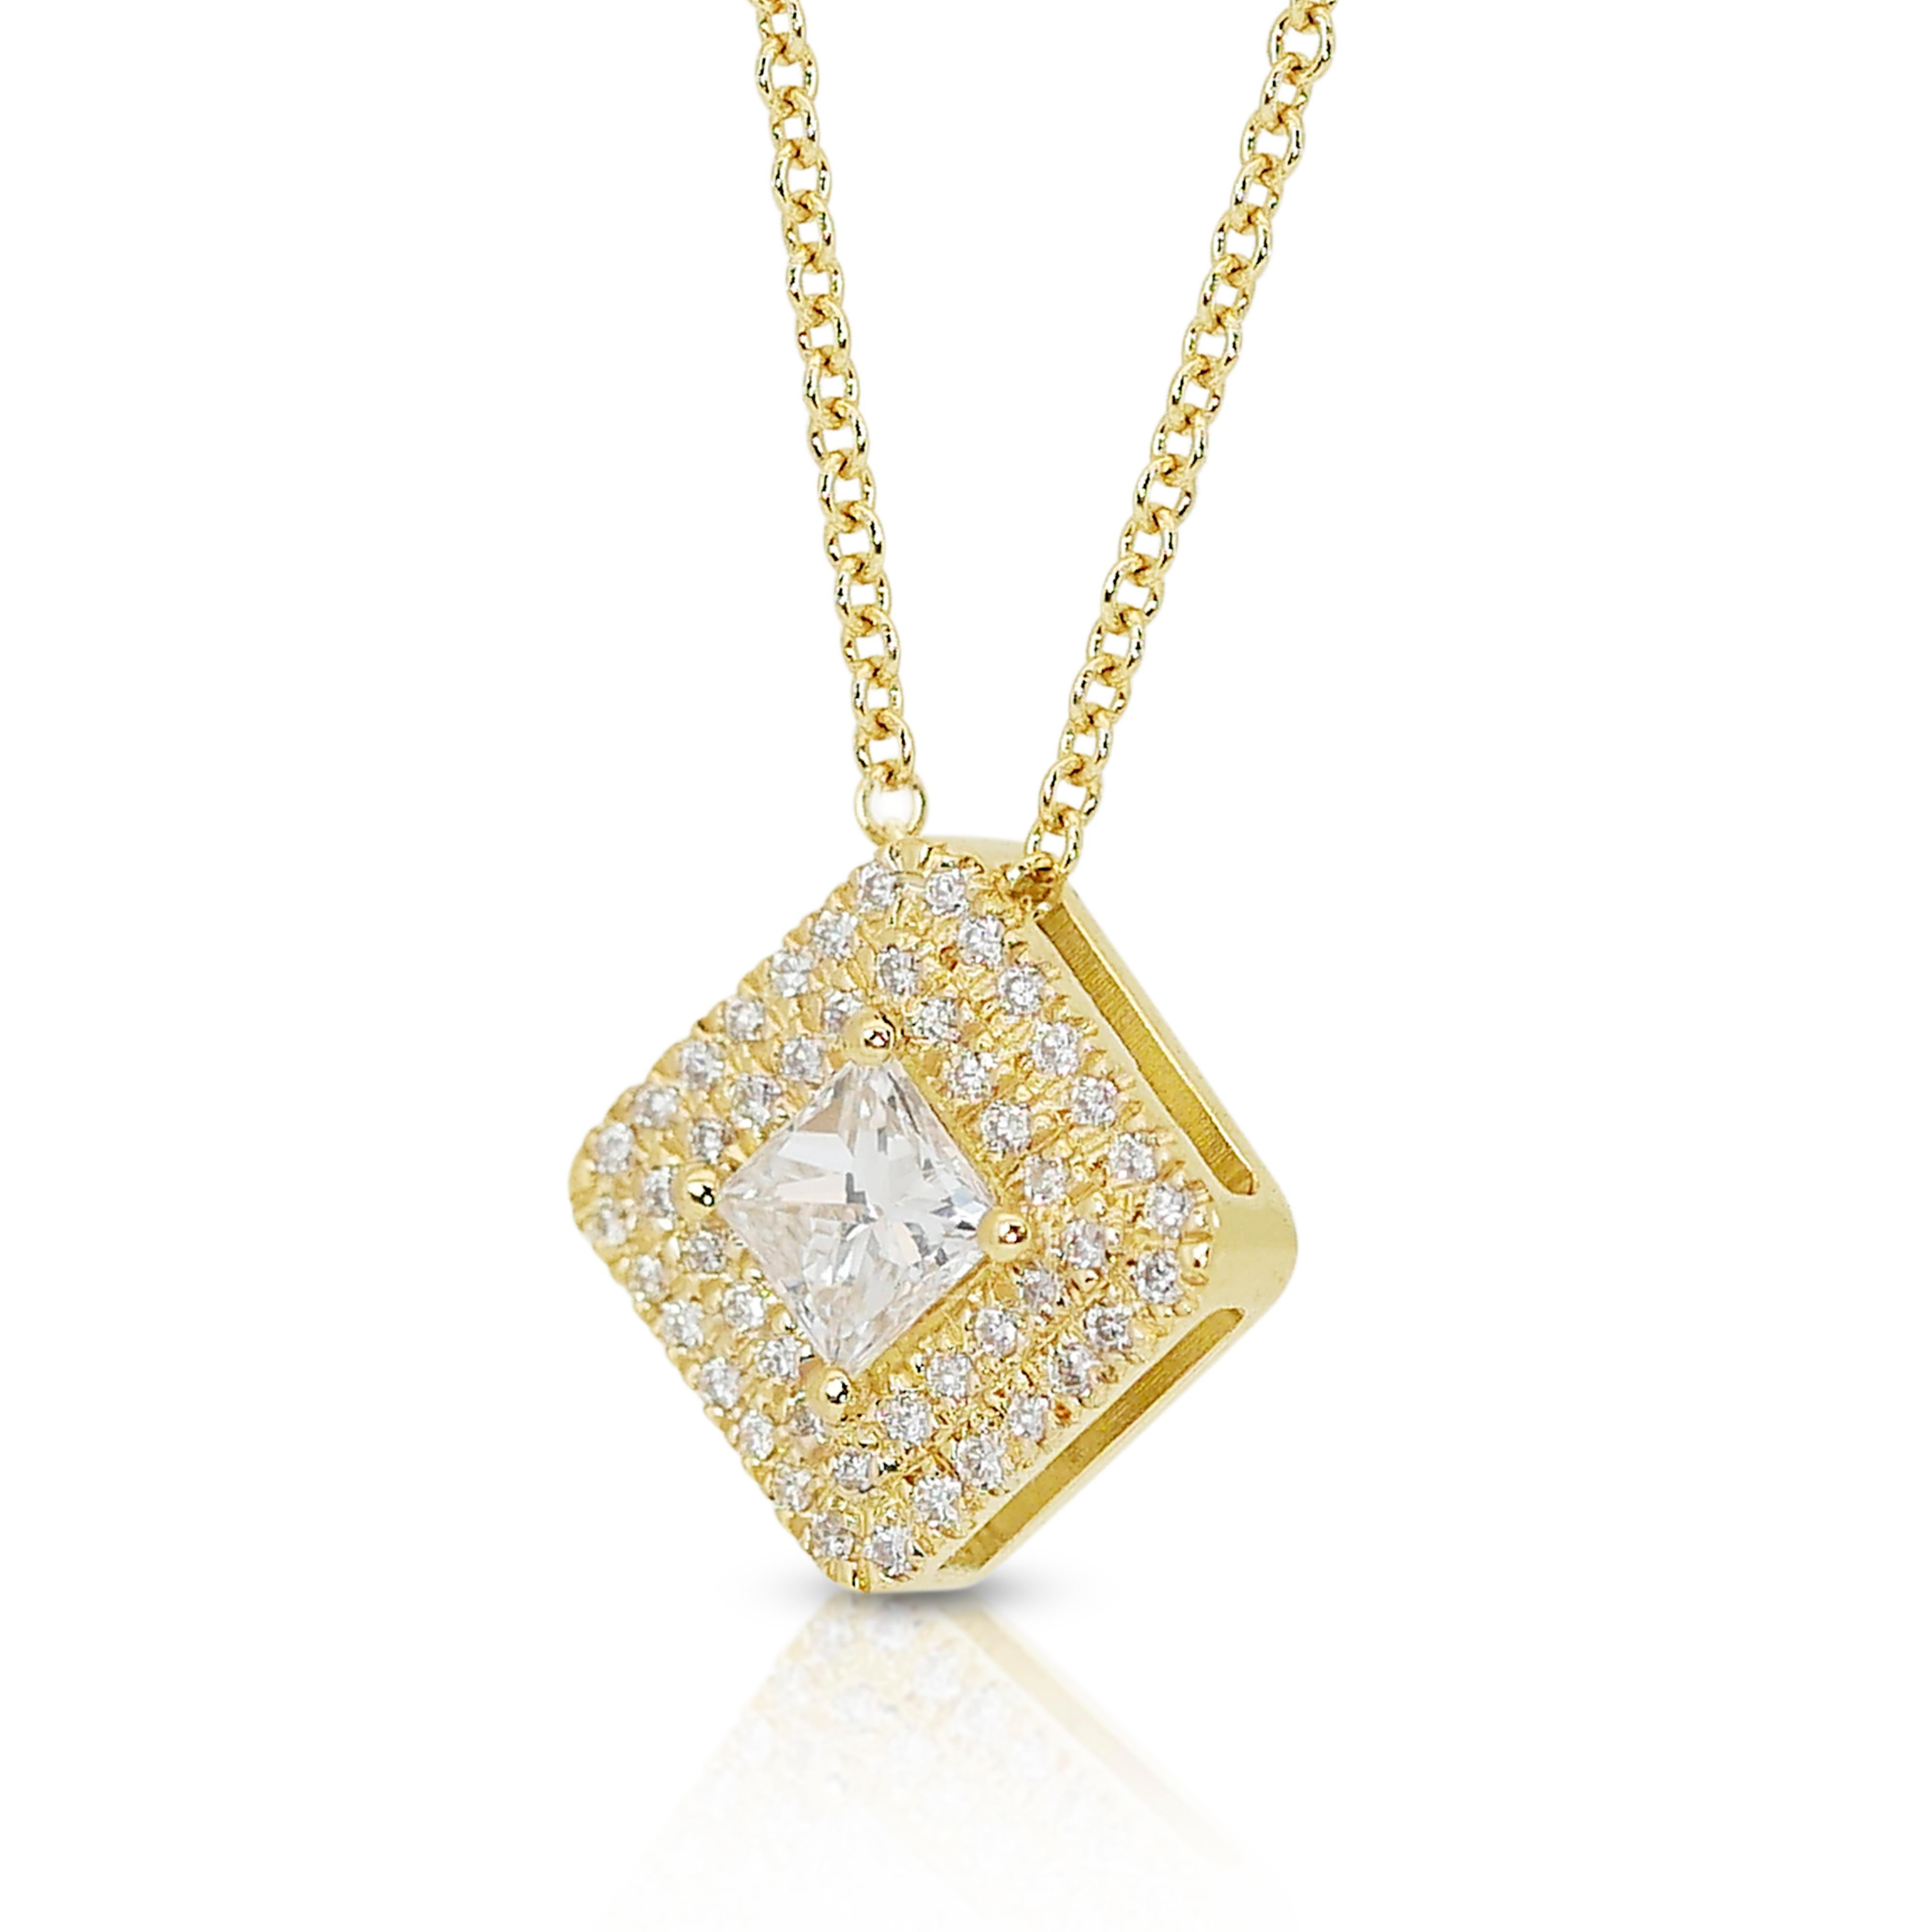 Sophisticated 0.60ct Diamonds Double Halo Necklace in 18k Yellow Gold - IGI Cert For Sale 2